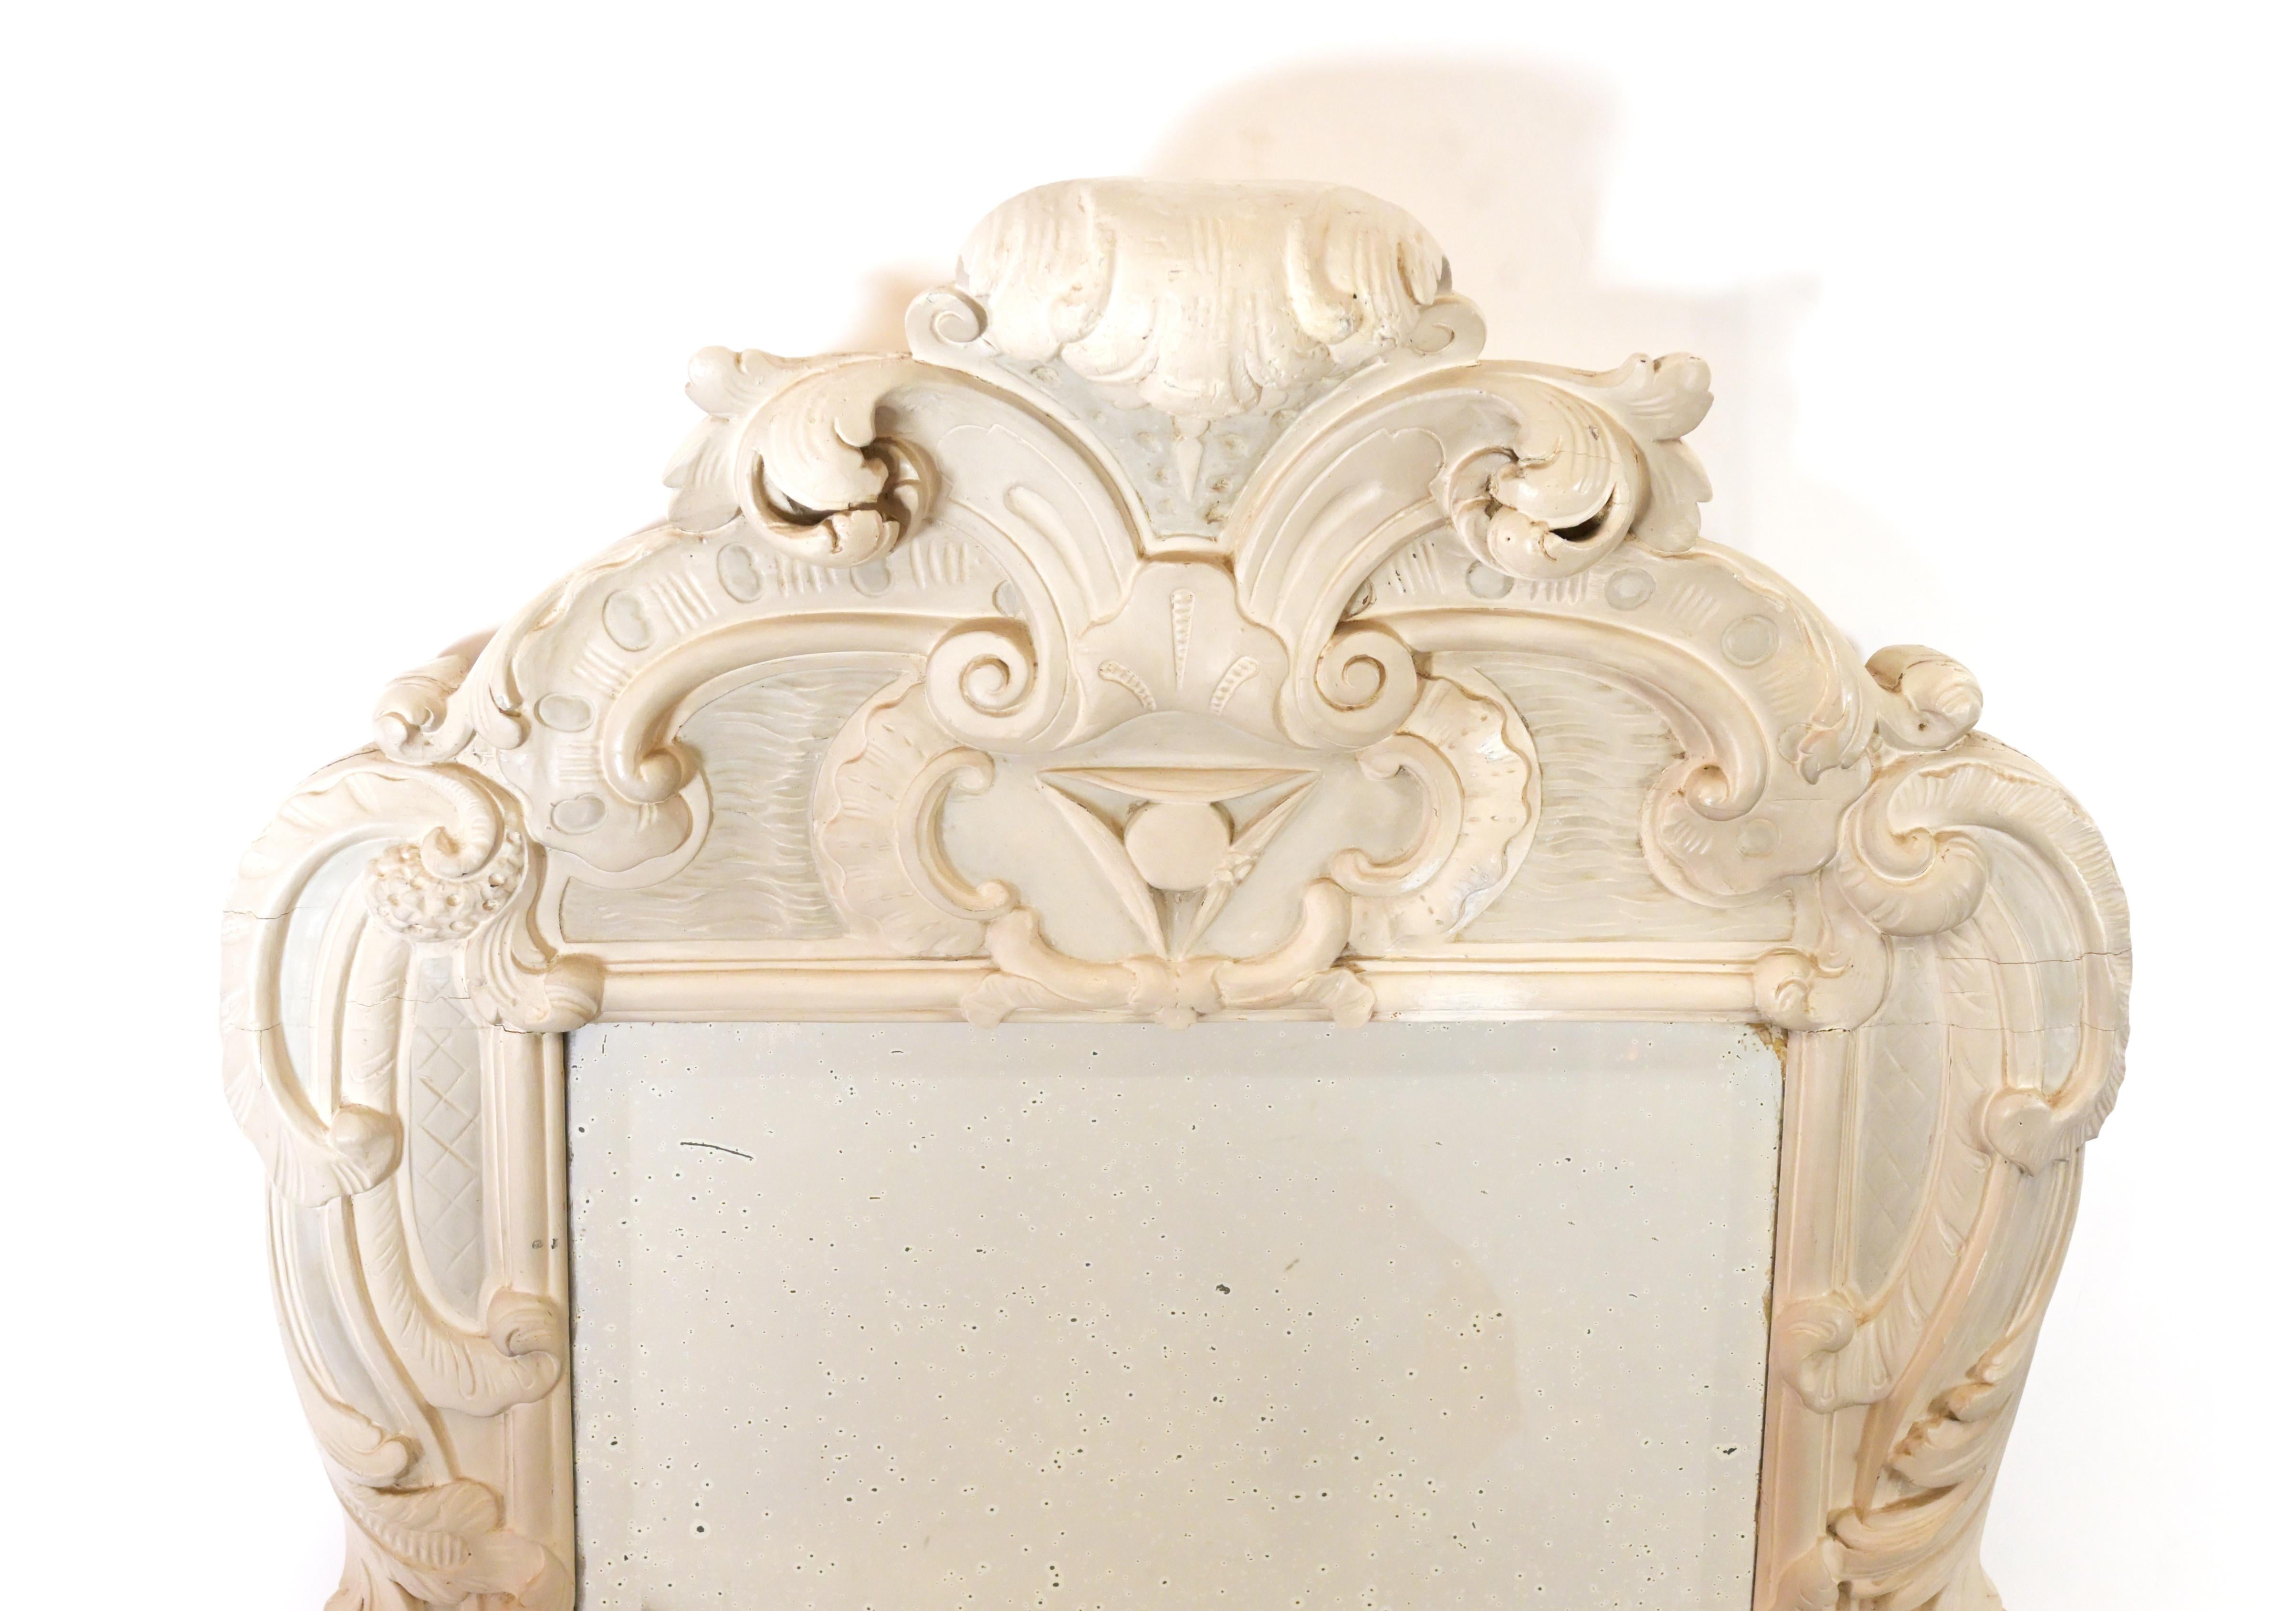 A 19th century Empire style mirror hand carved with intricate and ornately carved leaf and shell motifs, circa 1850.